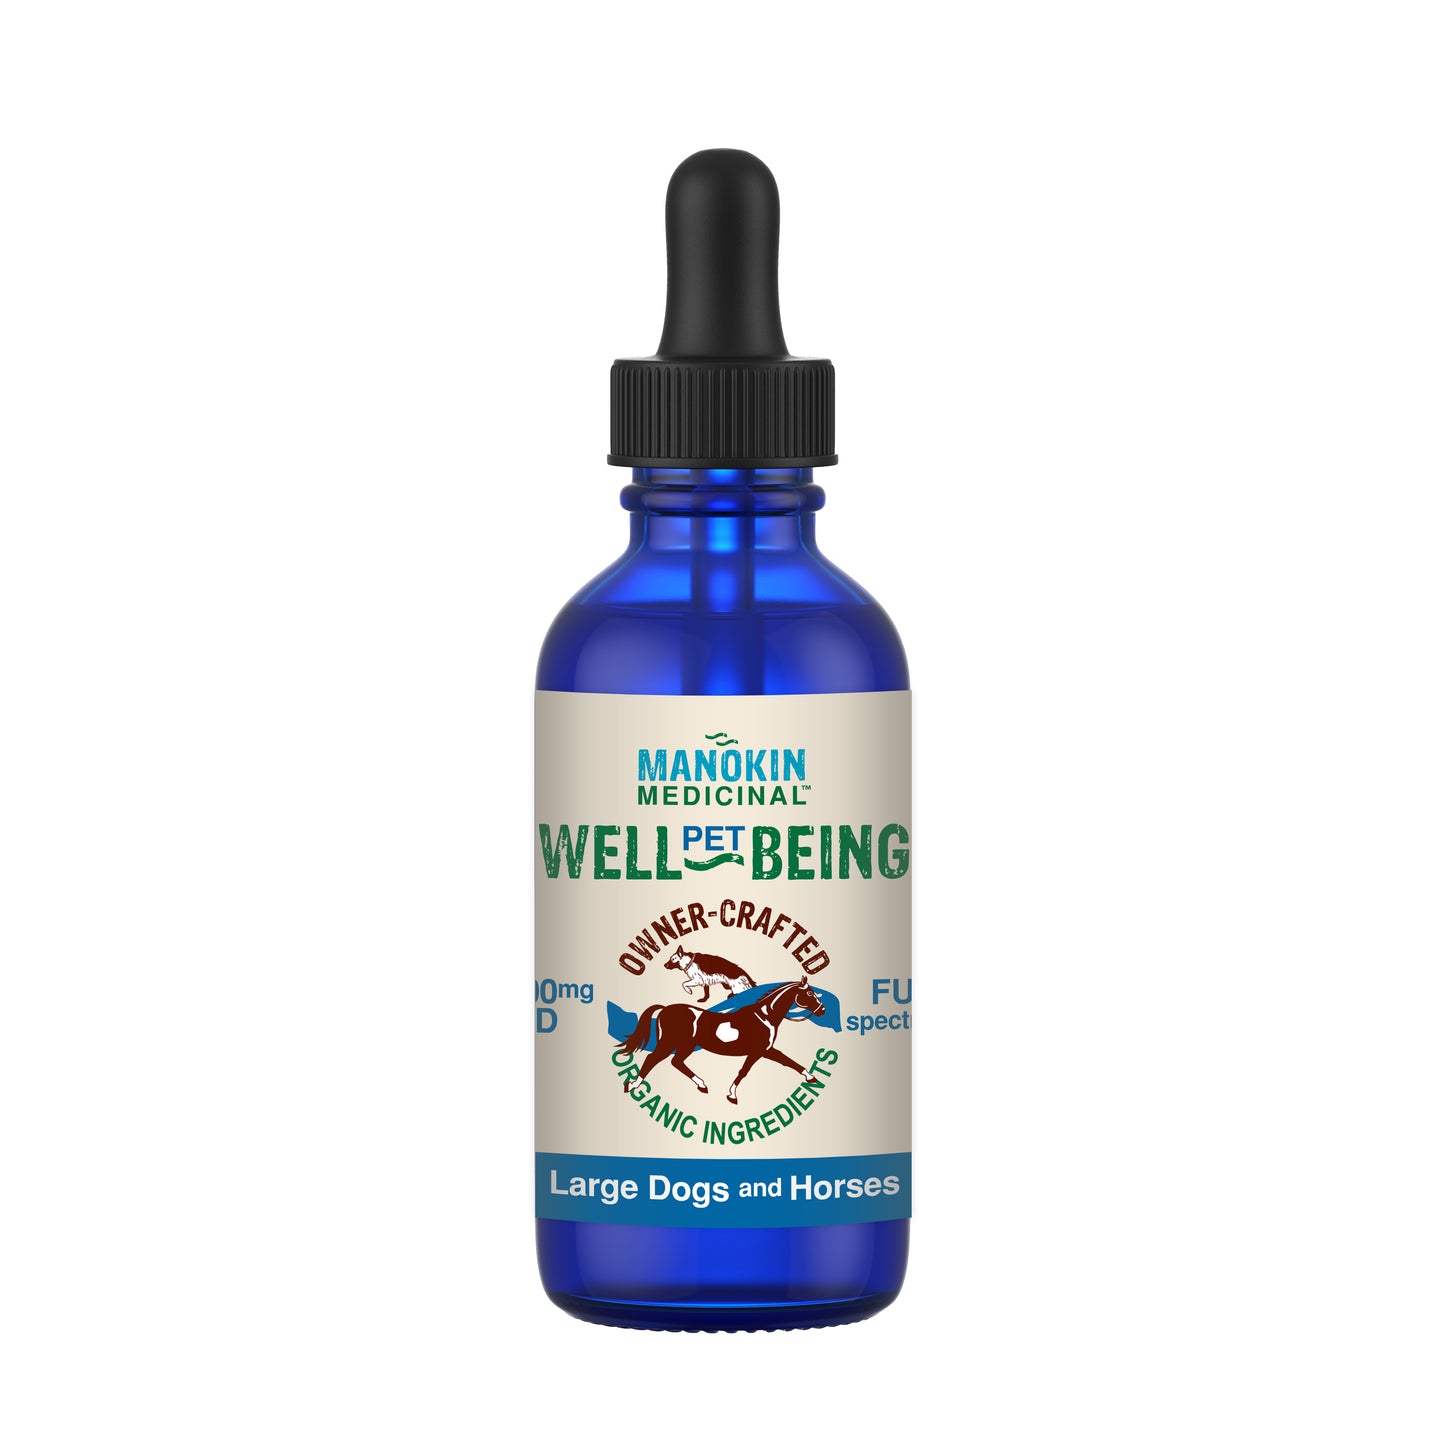 Well - Being 30 ml Tinctures for Large Dogs and Horses 1500mg